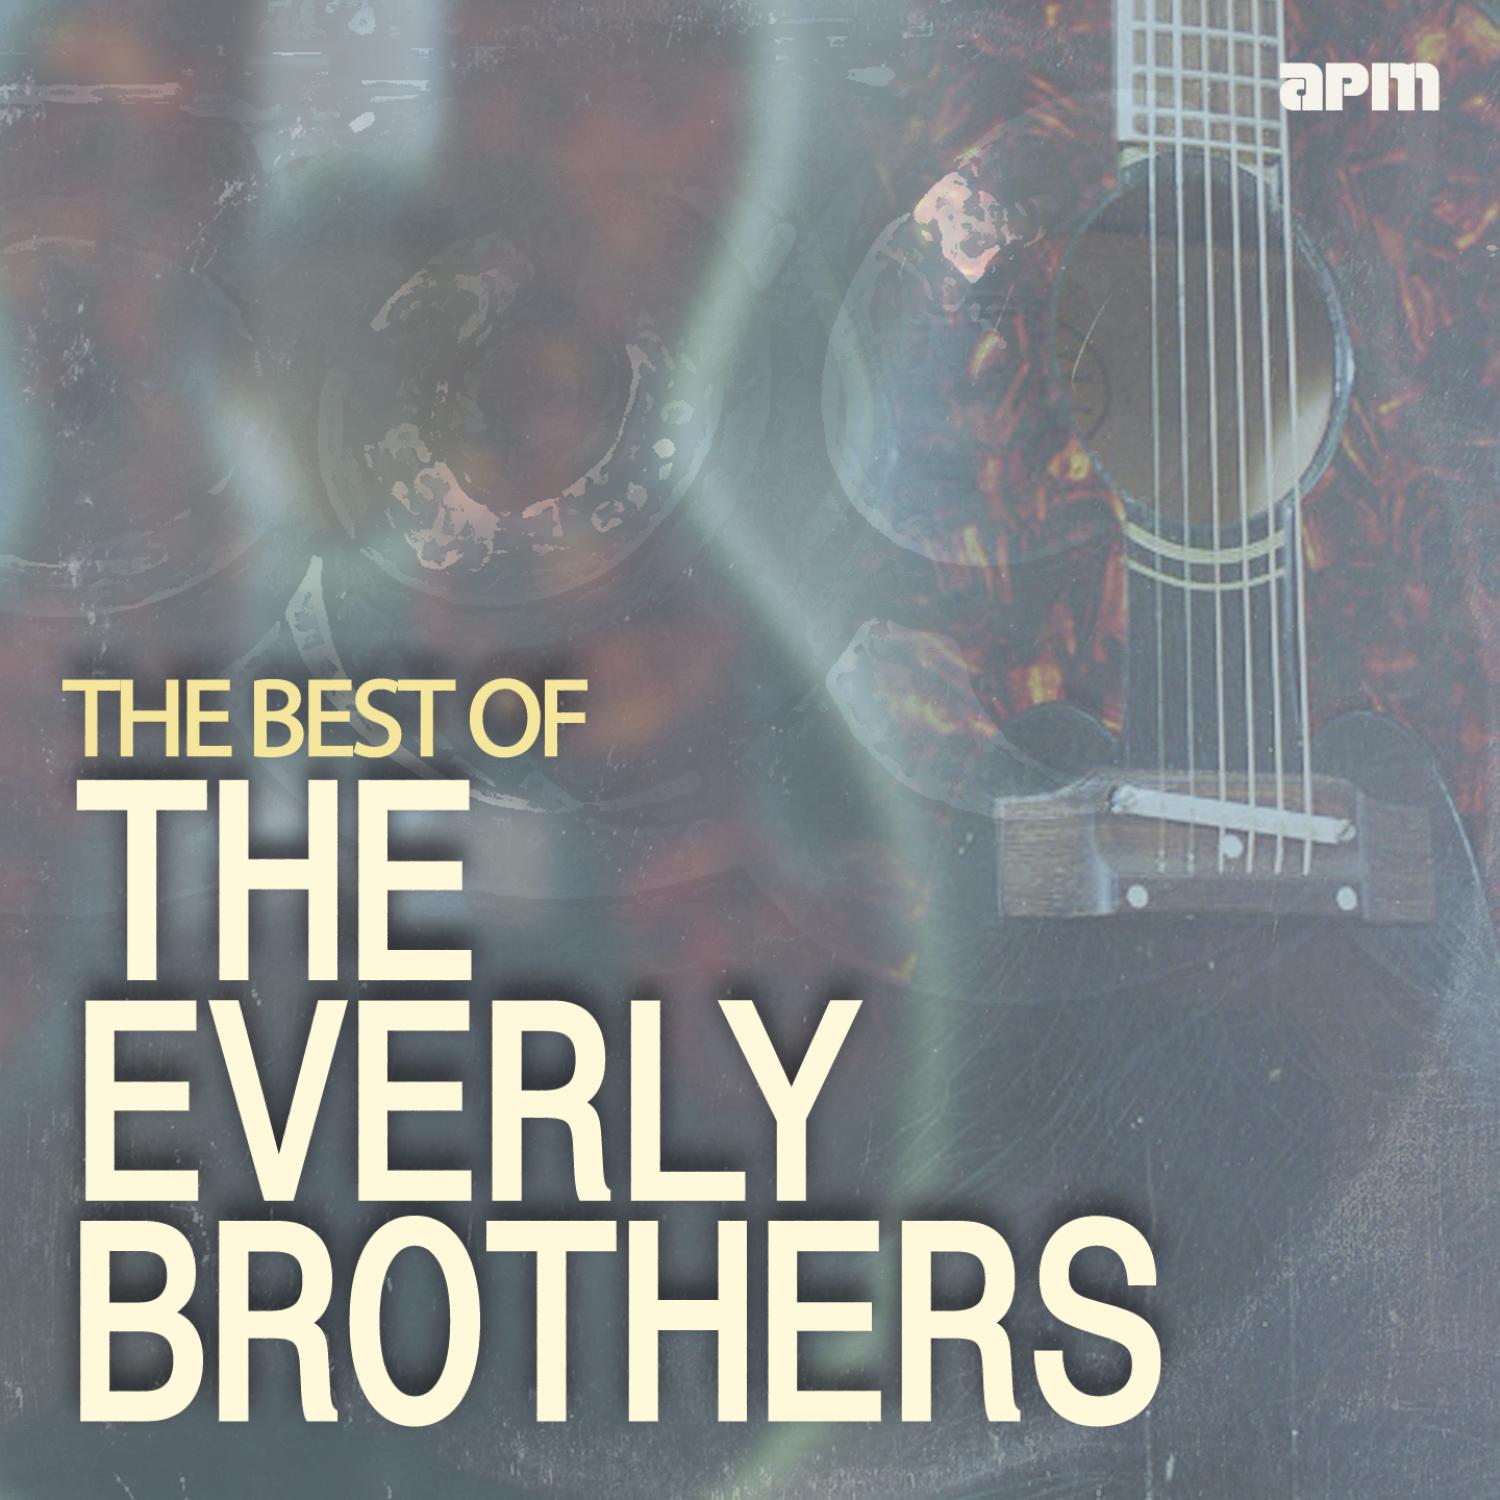 The Best of the Everly Brothers